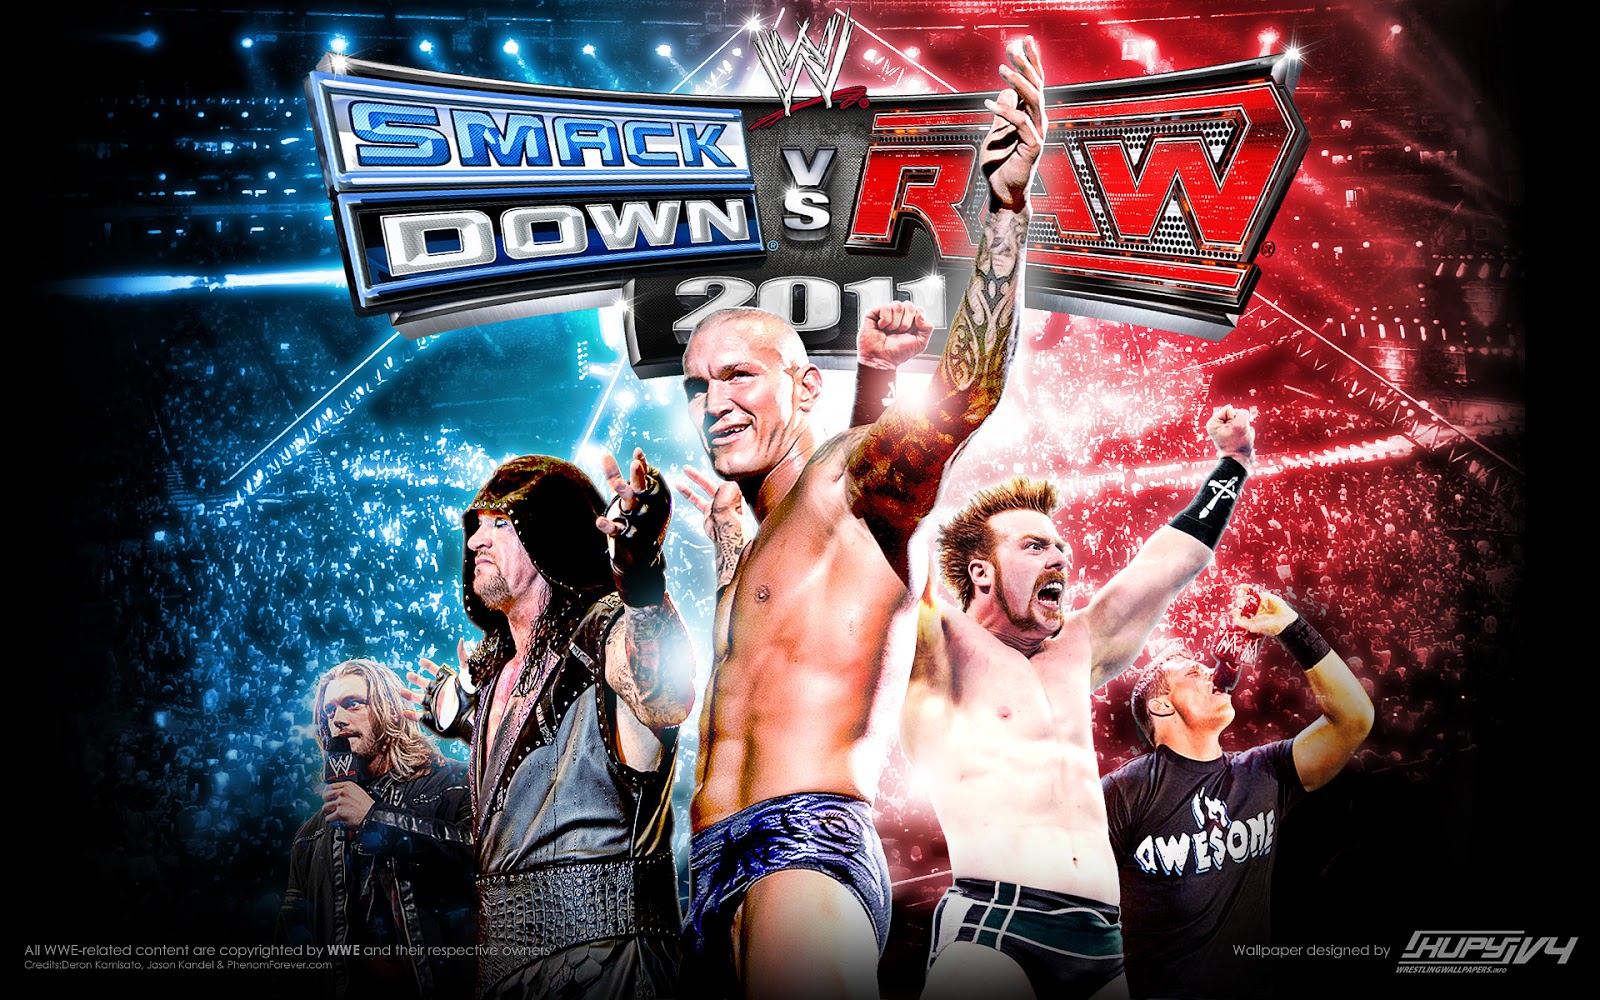 Wwe smackdown vs. raw 2011 ppsspp games android